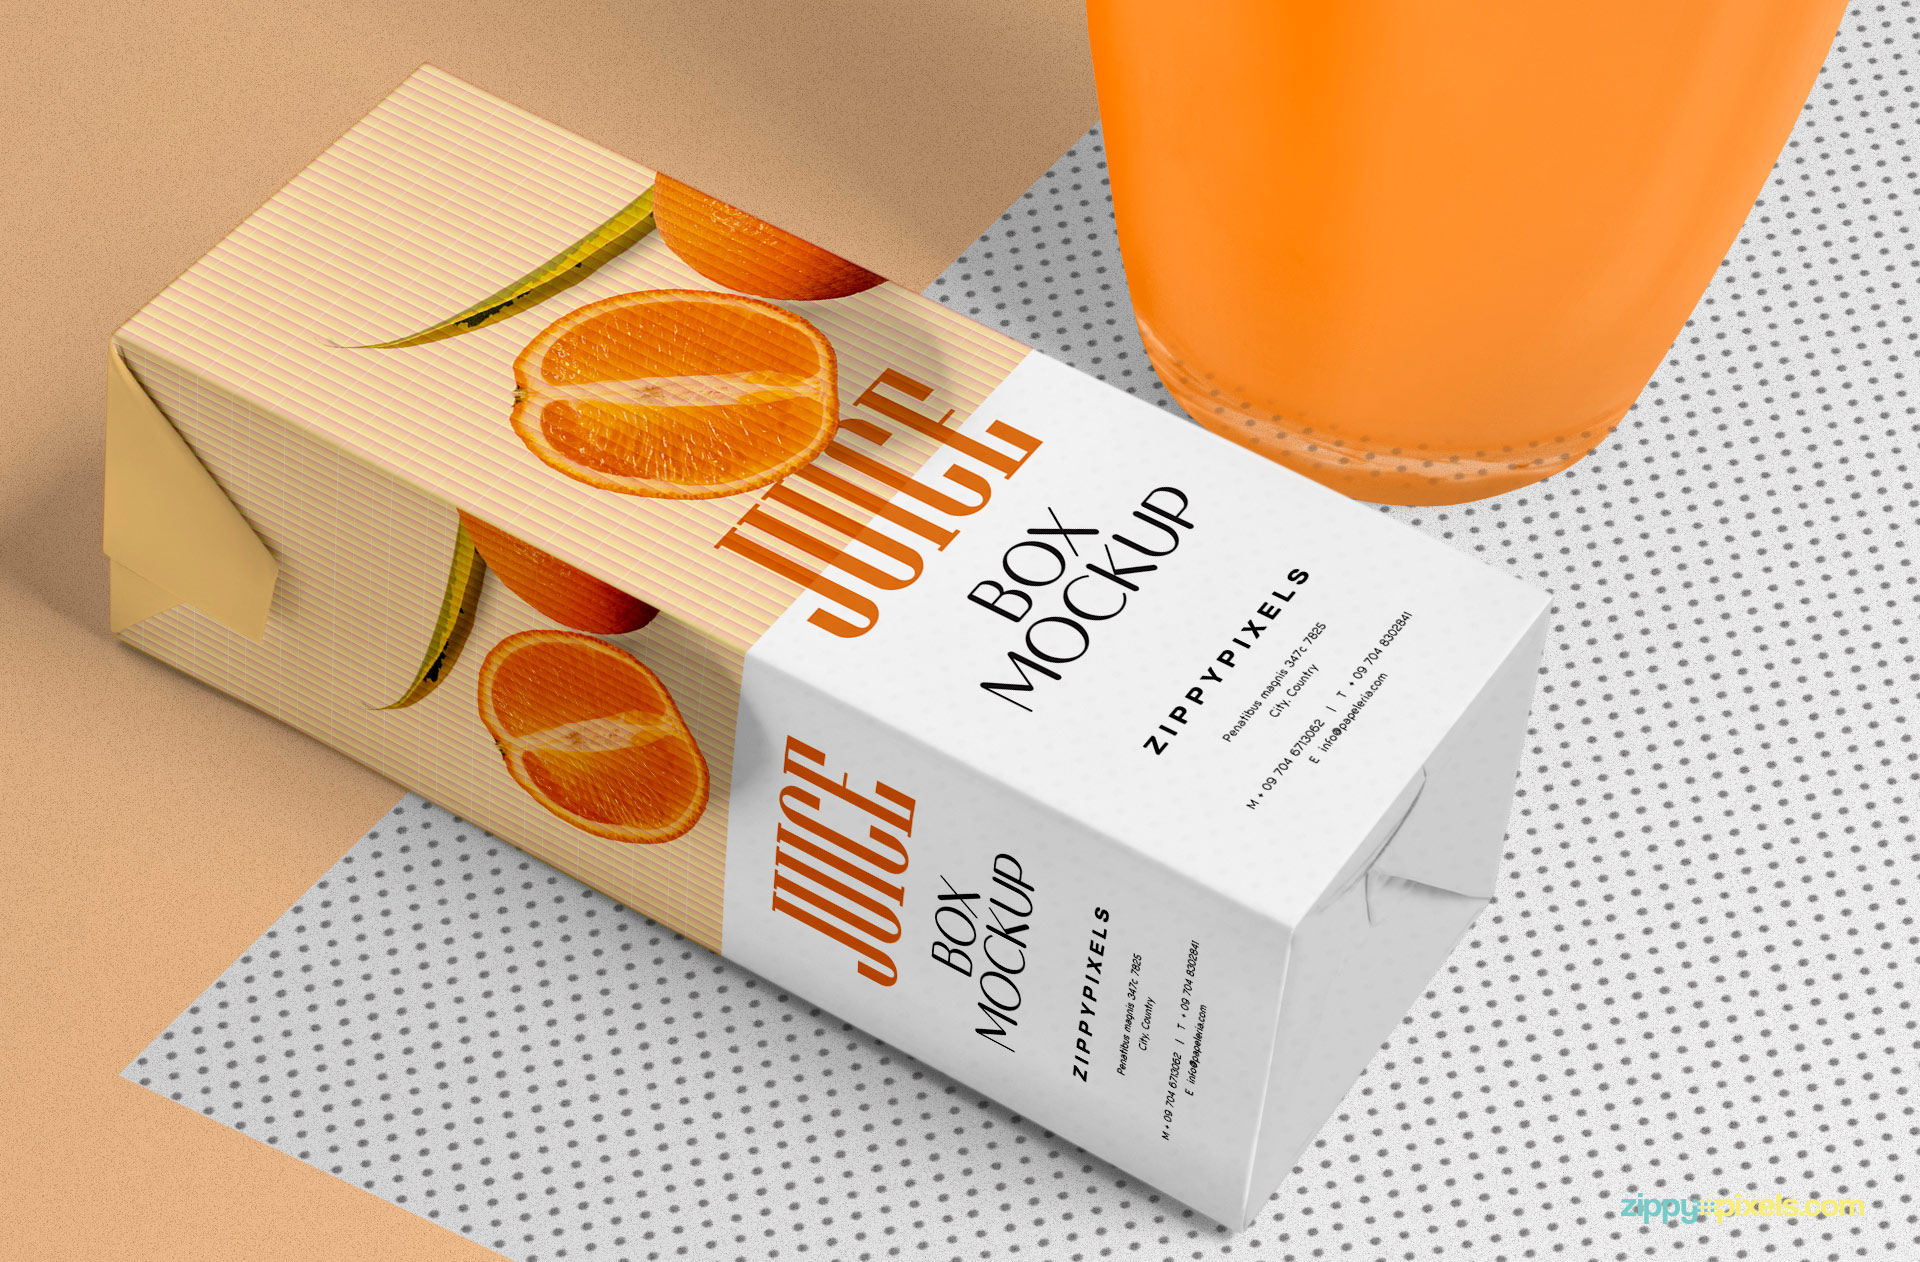 5 smart objects to customize the juice box.